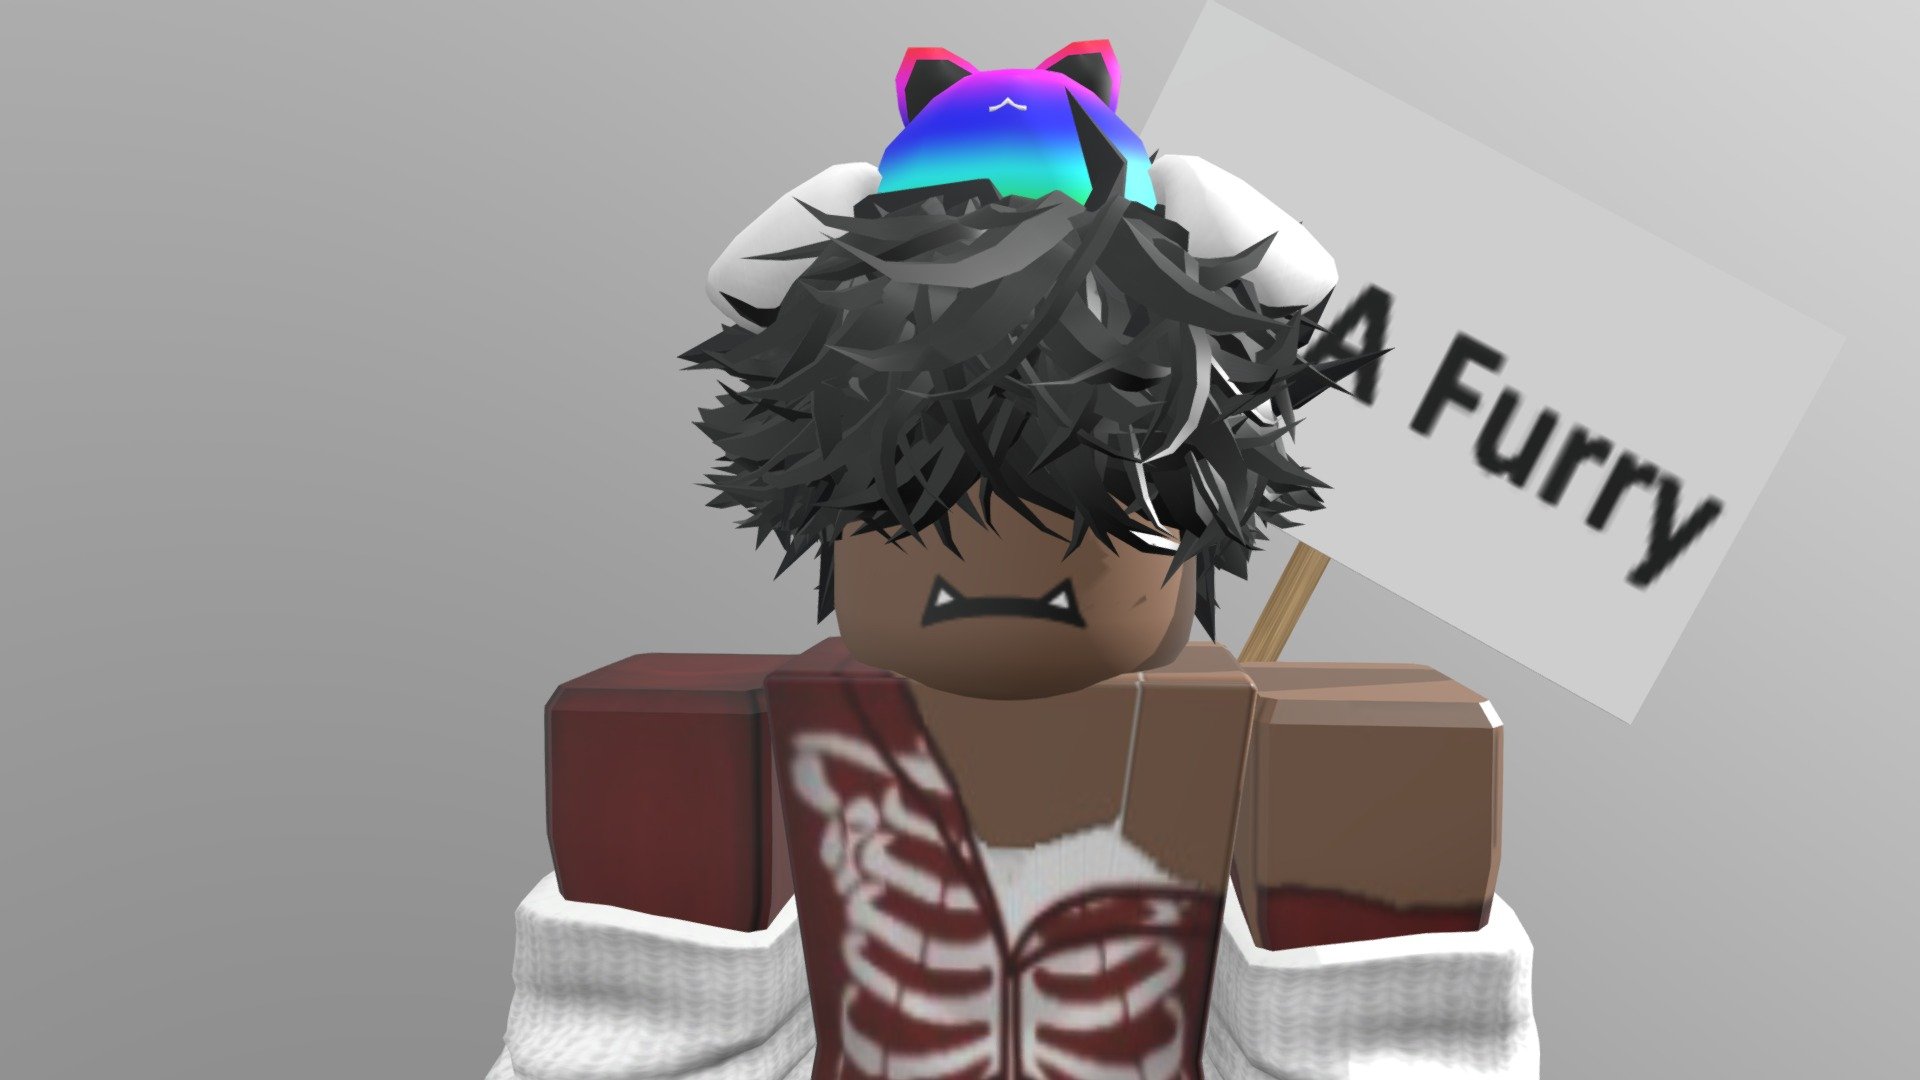 MessyRB on X: my roblox old character and new character   / X